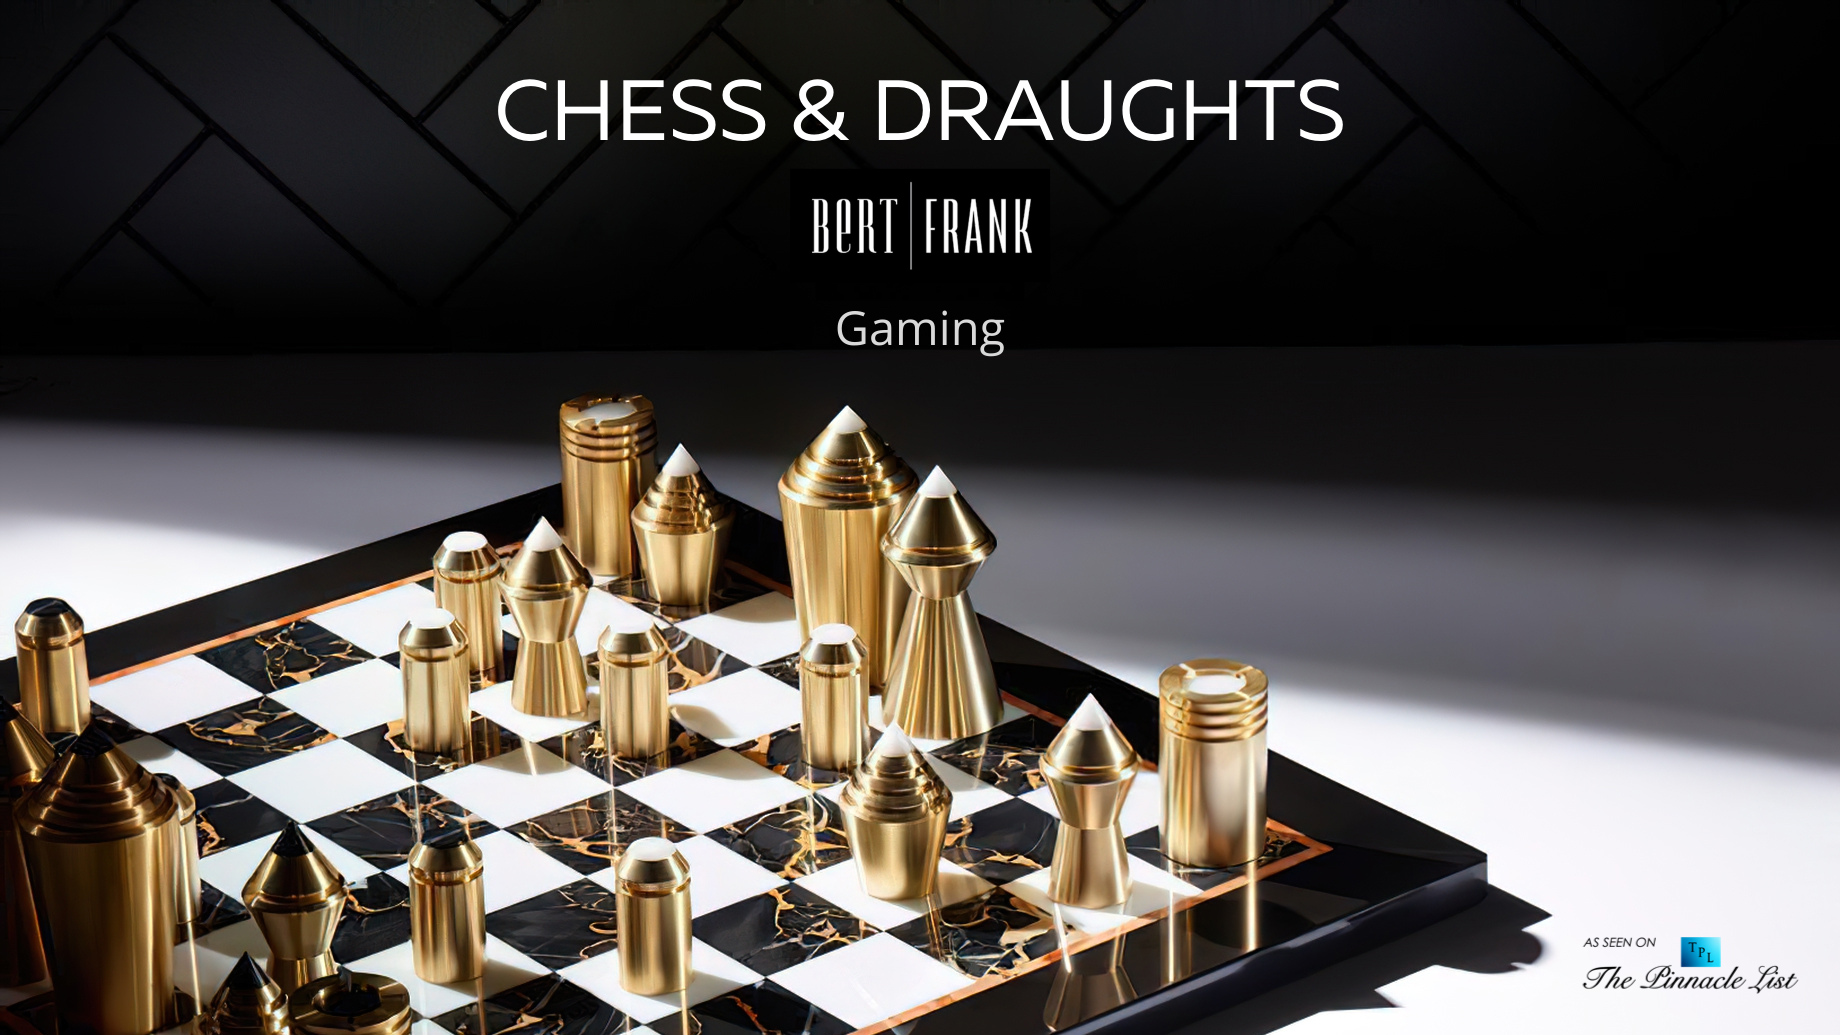 Luxury Designer Chess & Draughts Board Game Collection by Bert Frank